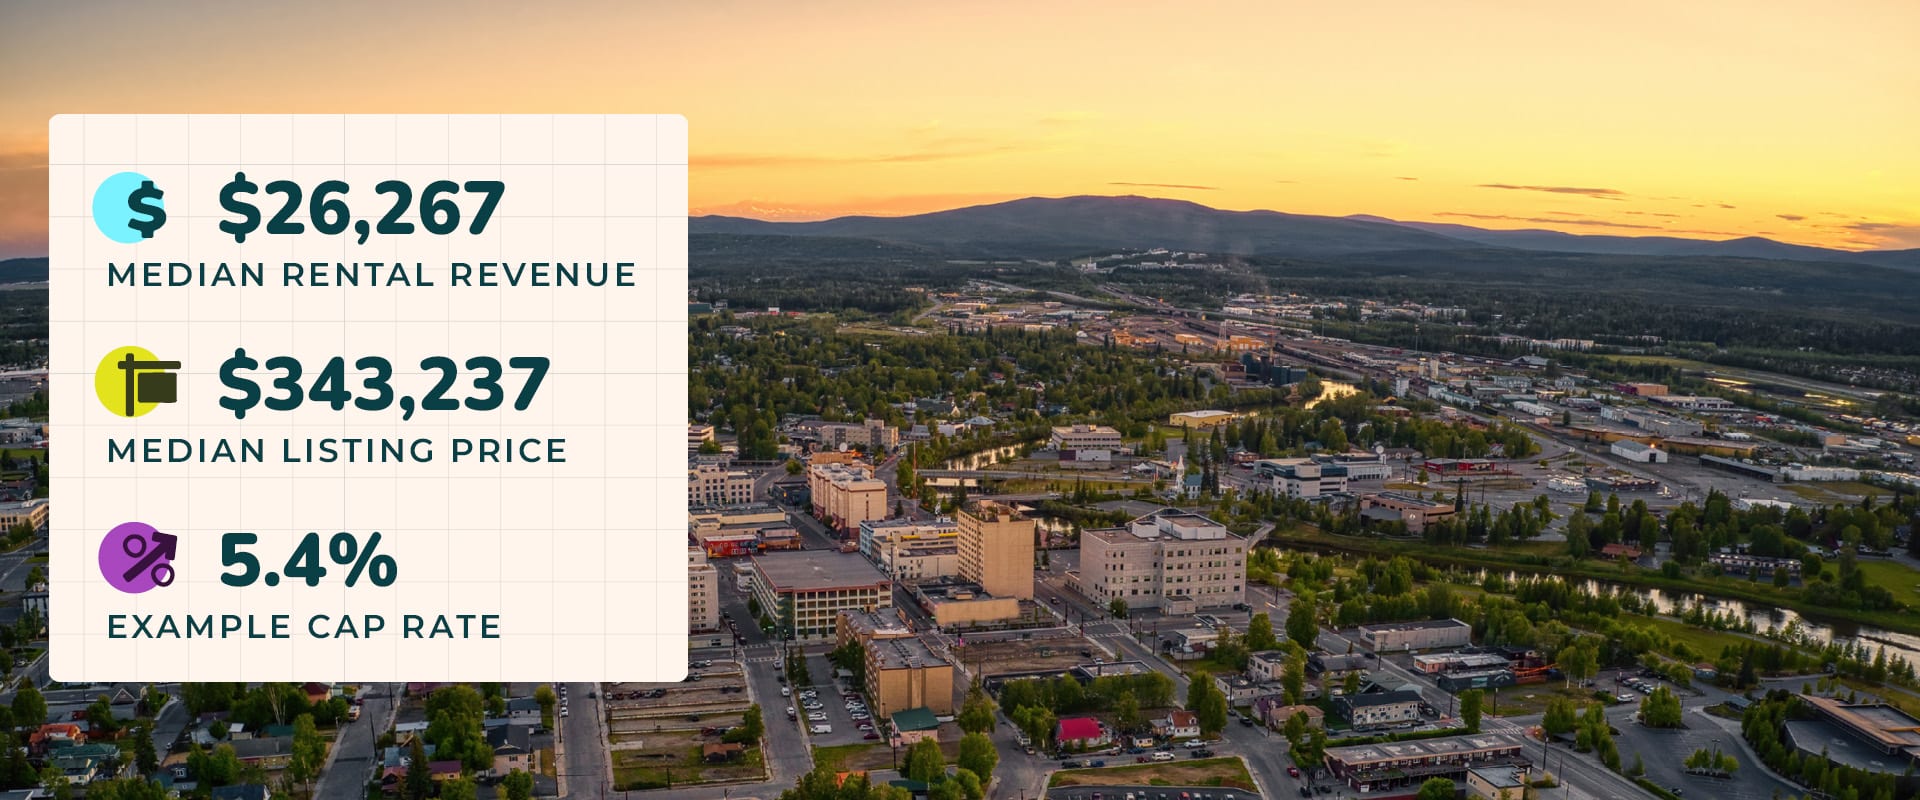 Aerial photo of the city of Fairbanks, AK with mountains in the distance and the yellow glow of sunset. Image text reads, "$26,267 median rental revenue. $343,237 median listing price. 5.4% example cap rate."